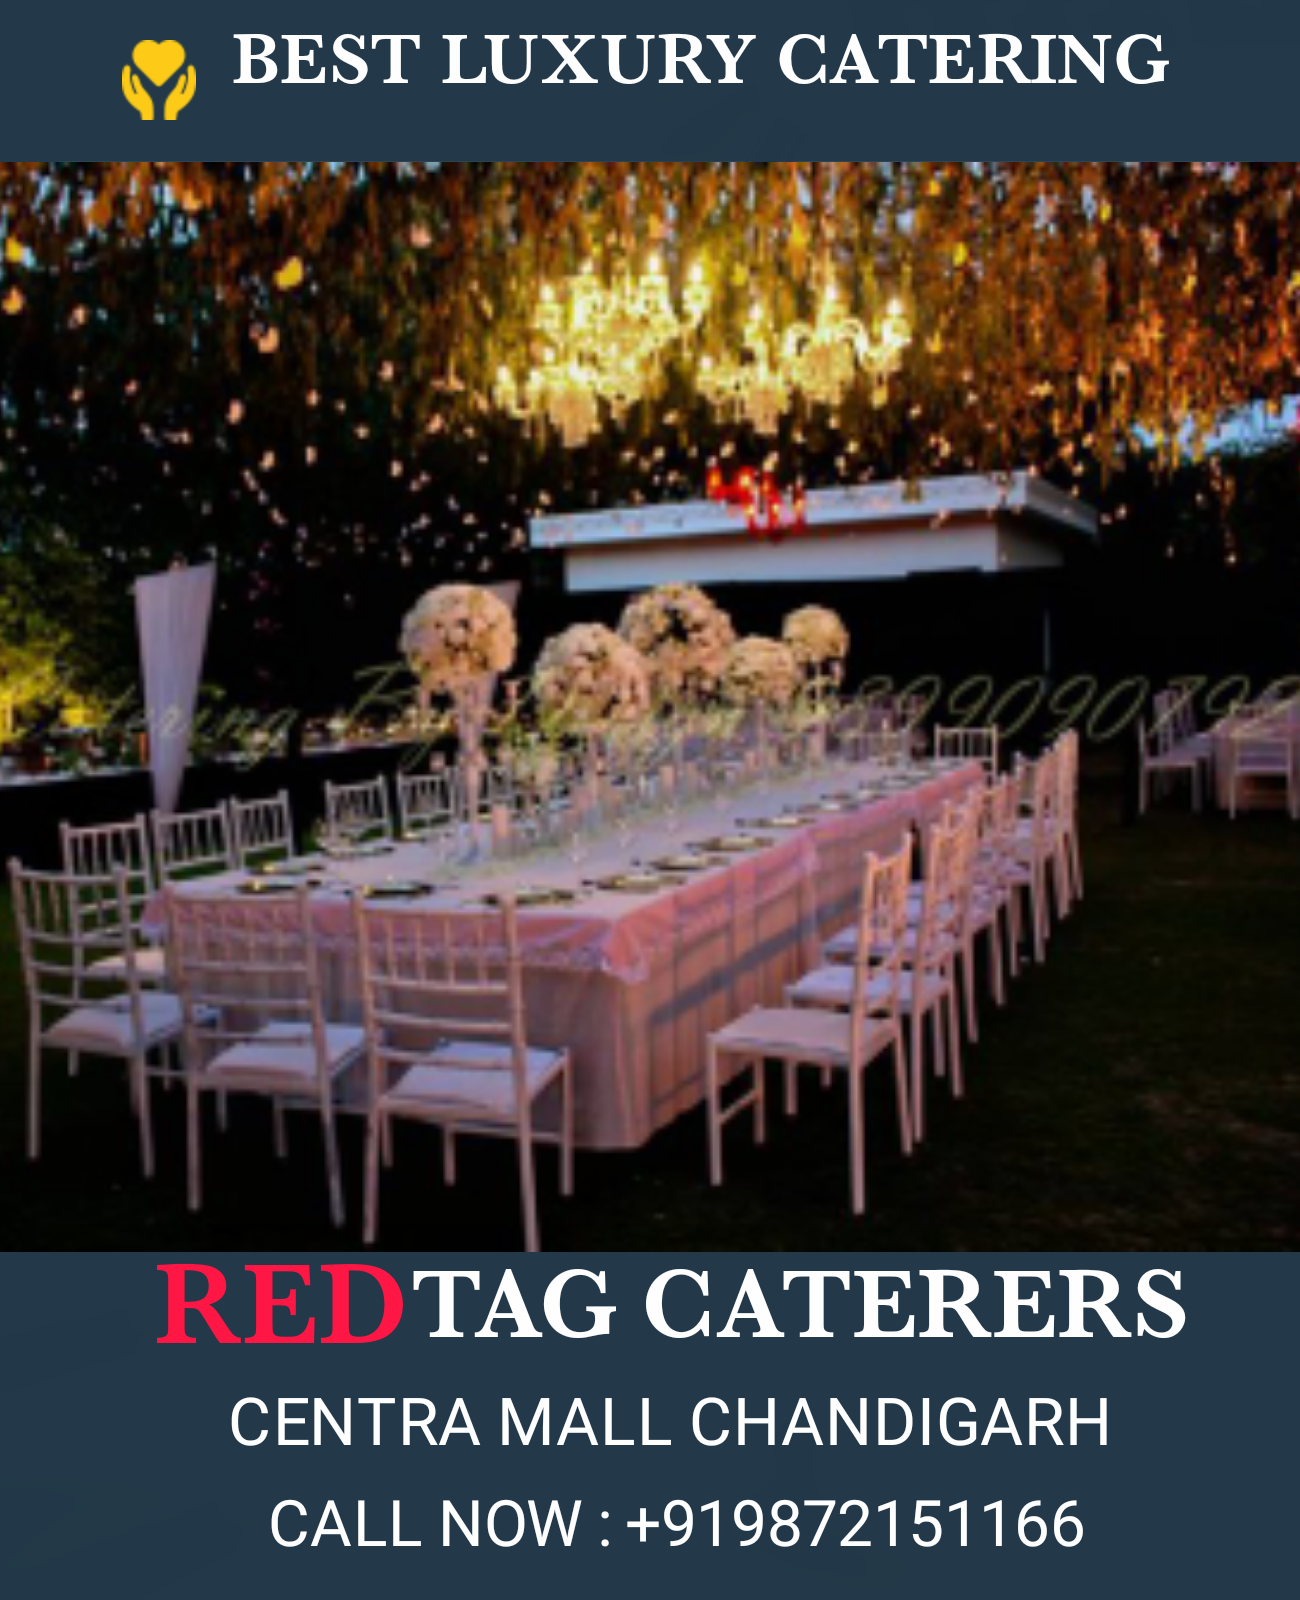 Best caterers in zirakpur Punjab  | Red Tag Caterers | Best corporate caterers in zirakpur Punjab, best experienced catering company in zirakpur  Punjab,  - GL46642